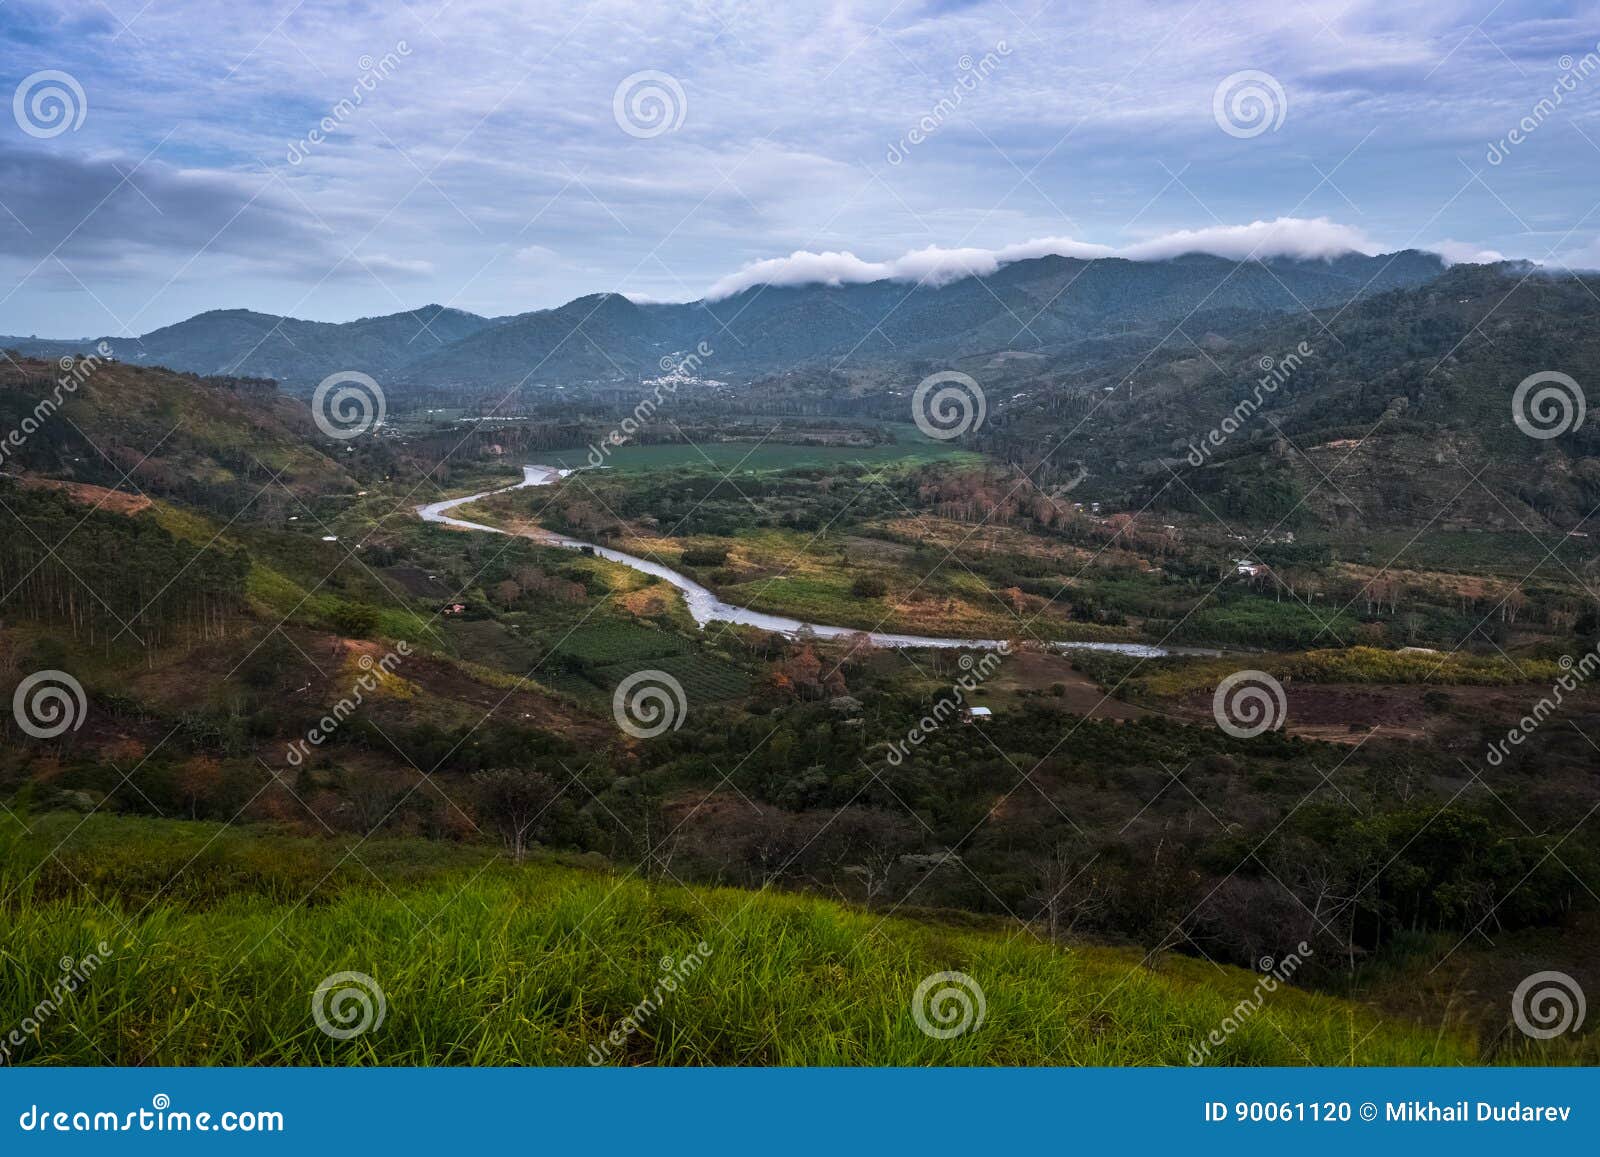 the valley of orosi